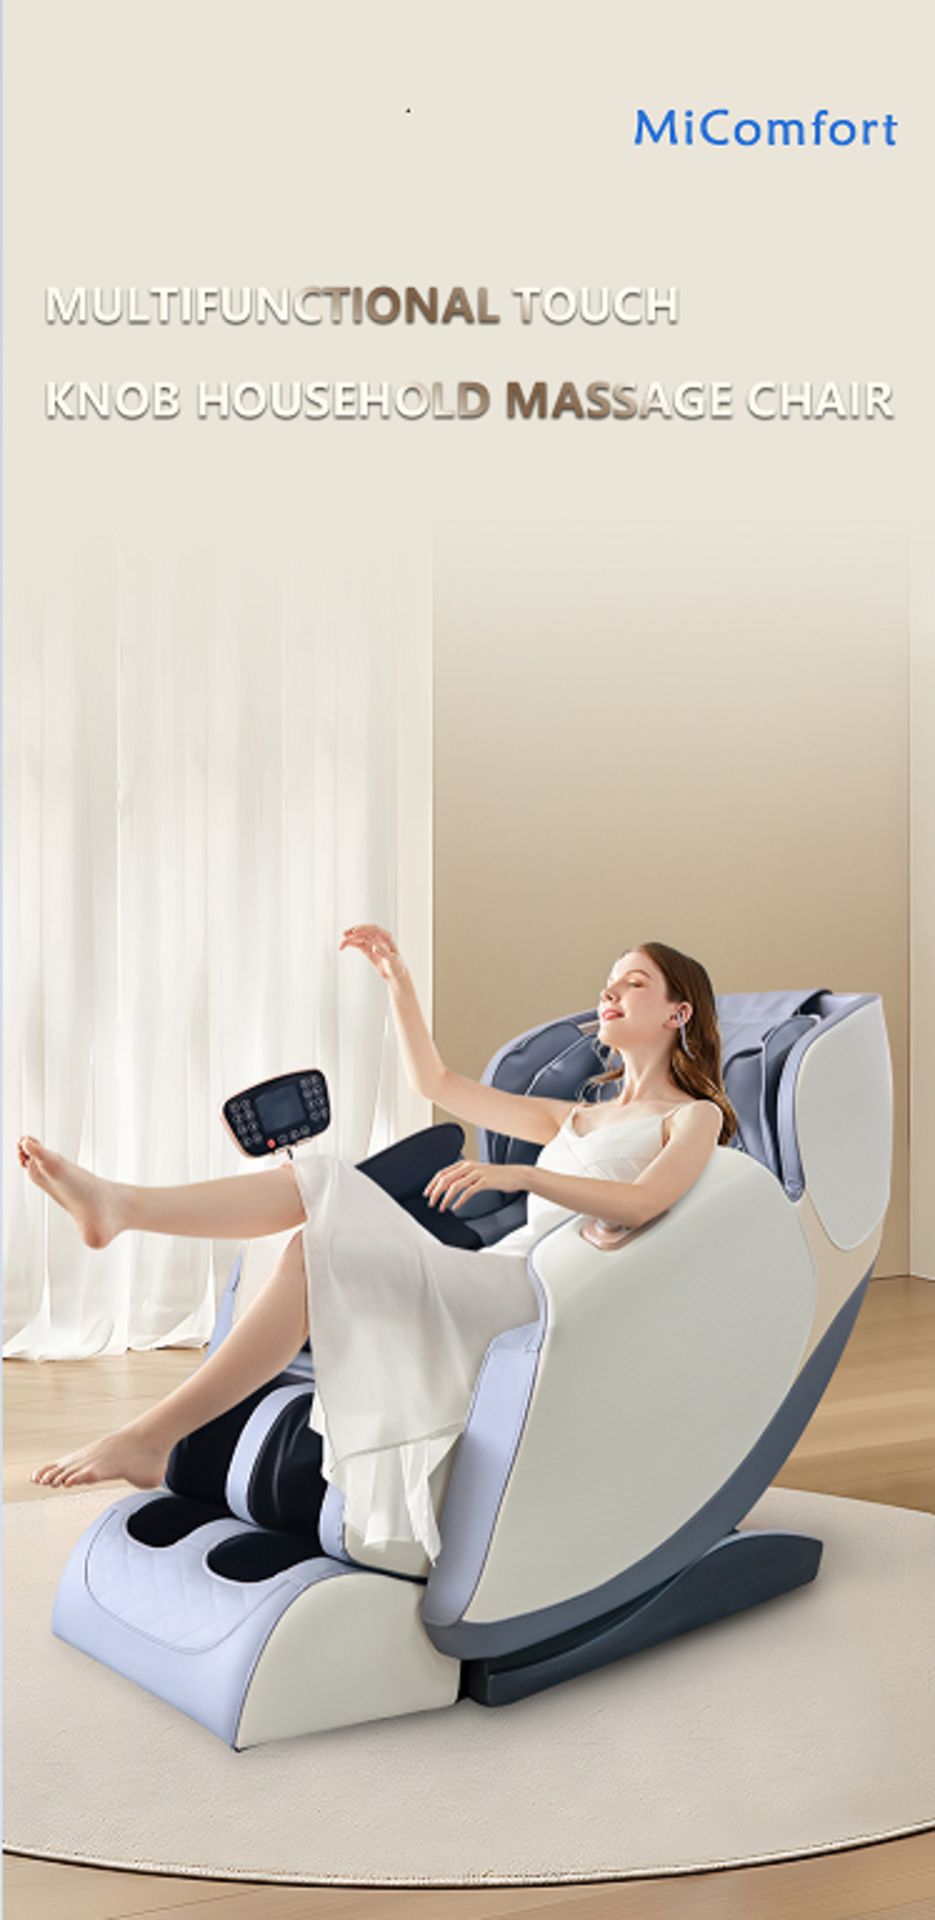 Brand New BOX Orchid White/Grey MiComfort Full Body Massage Chair RRP £2199 AS SEEN ON TV! *NO VAT* - Image 10 of 10